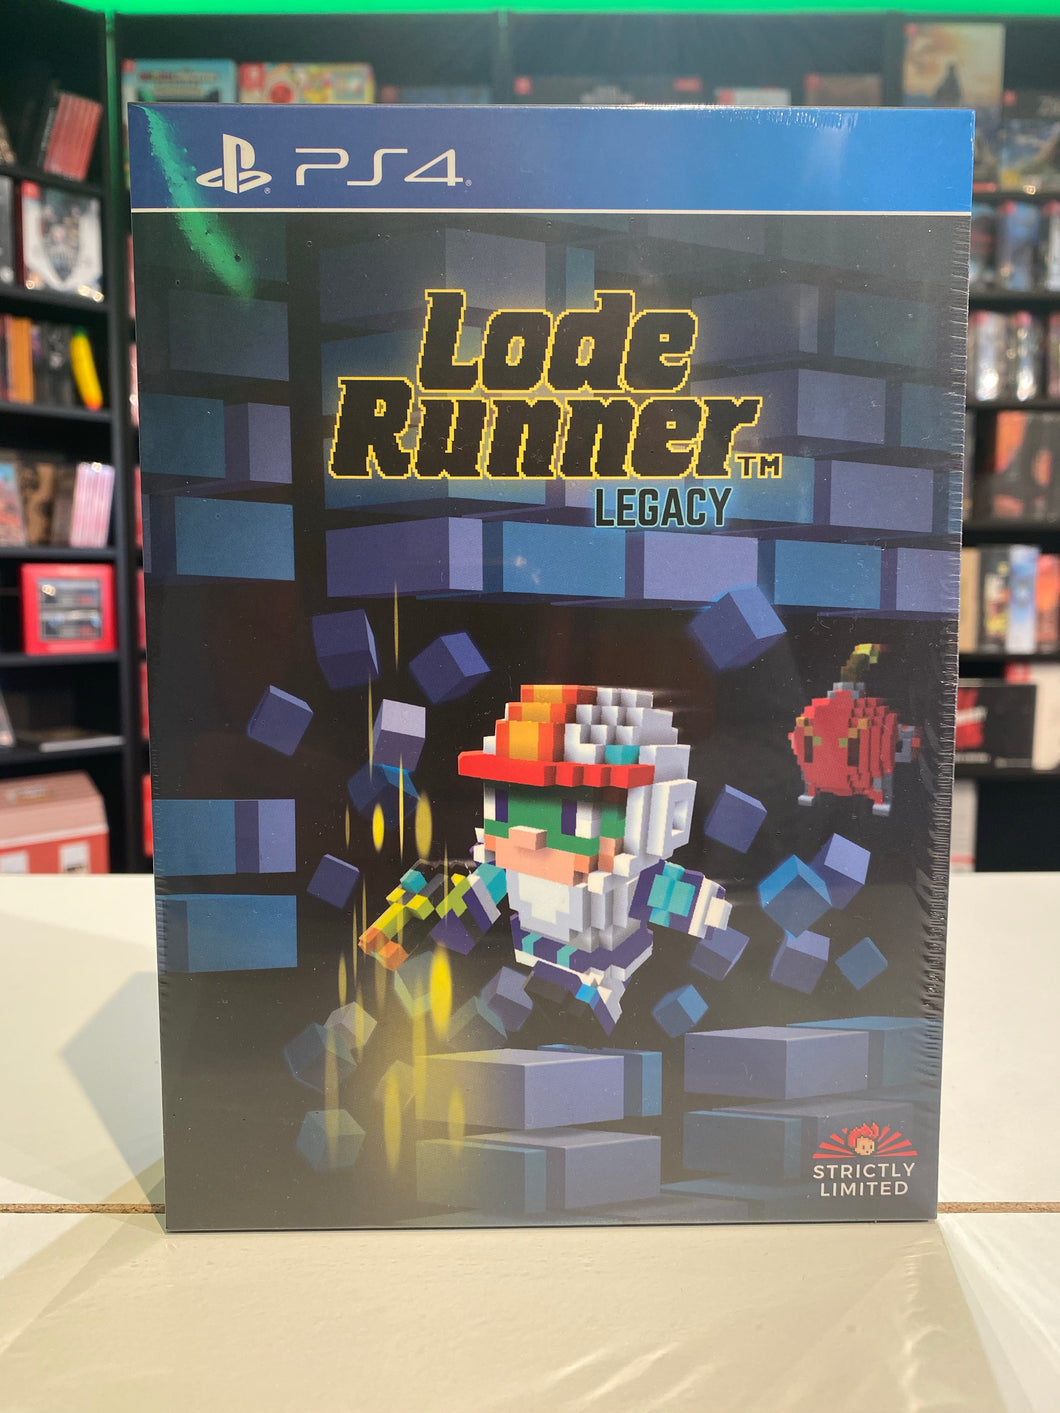 Lode runner collector’s edition / strictly limited games / x800 / ps4